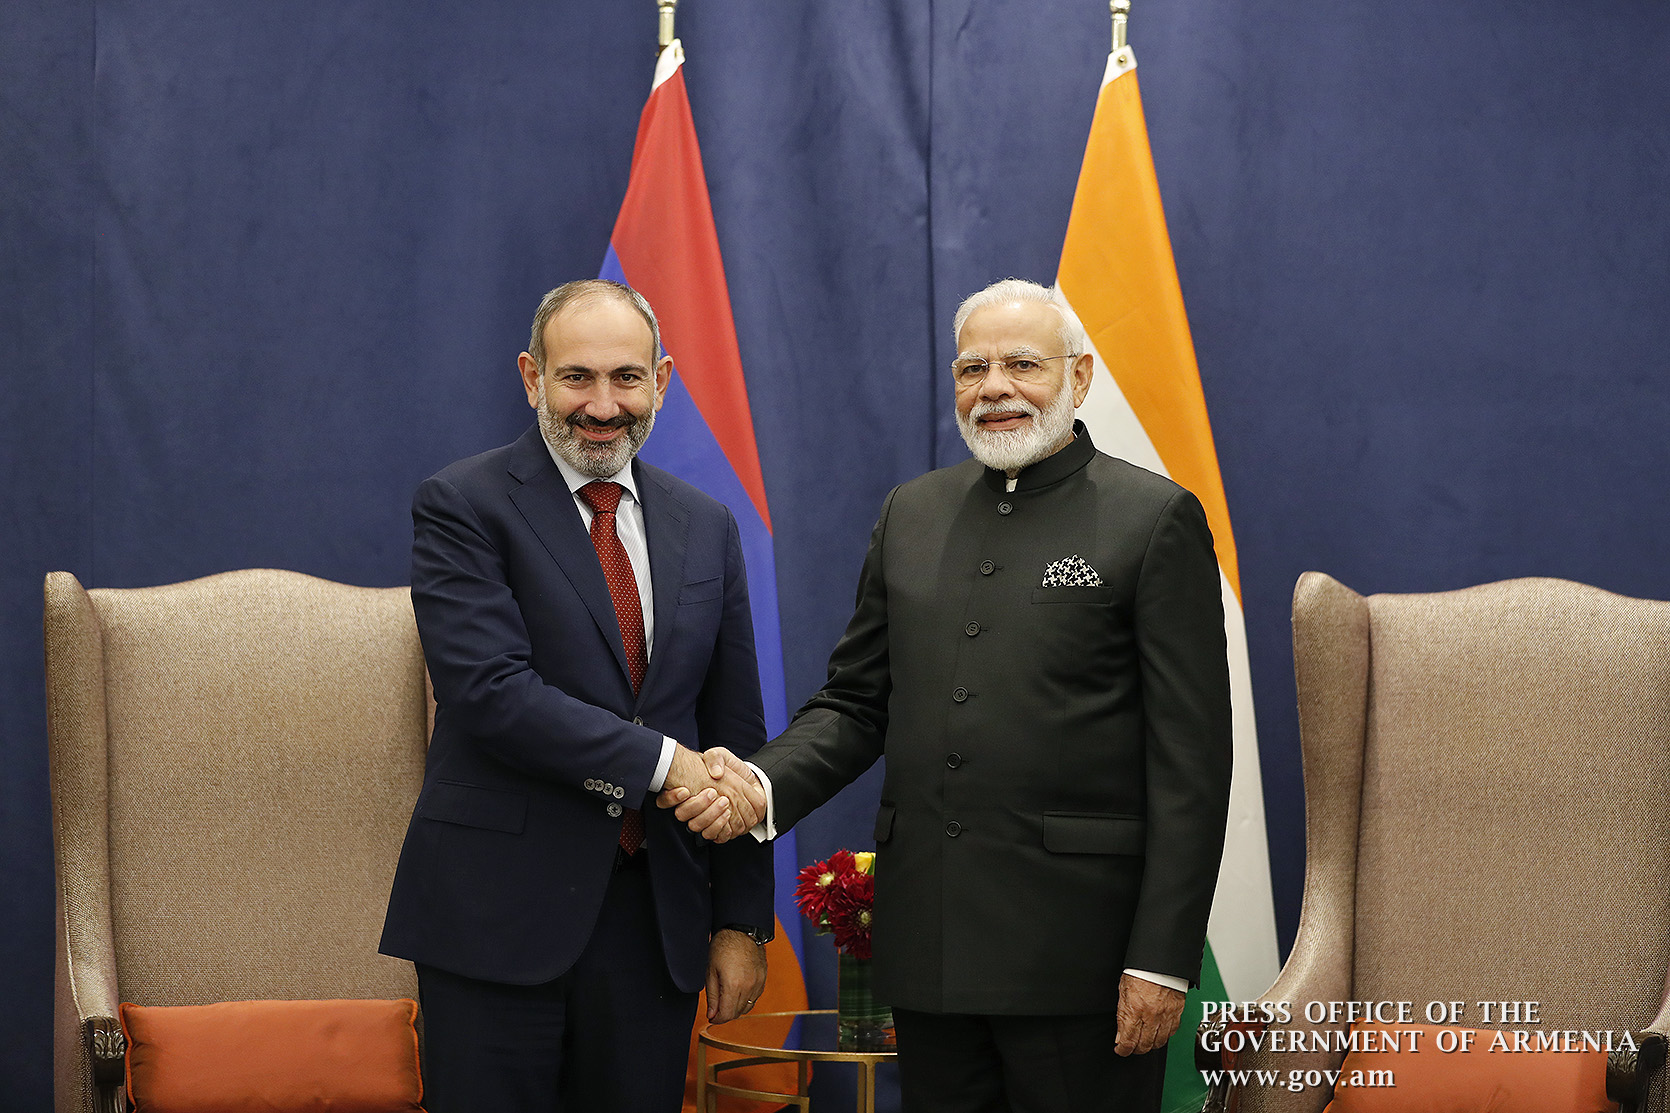 Armenian Premier meets with India's Prime Minister Narendra Modi in New York - Press releases - Updates - The Prime Minister of the Republic of Armenia